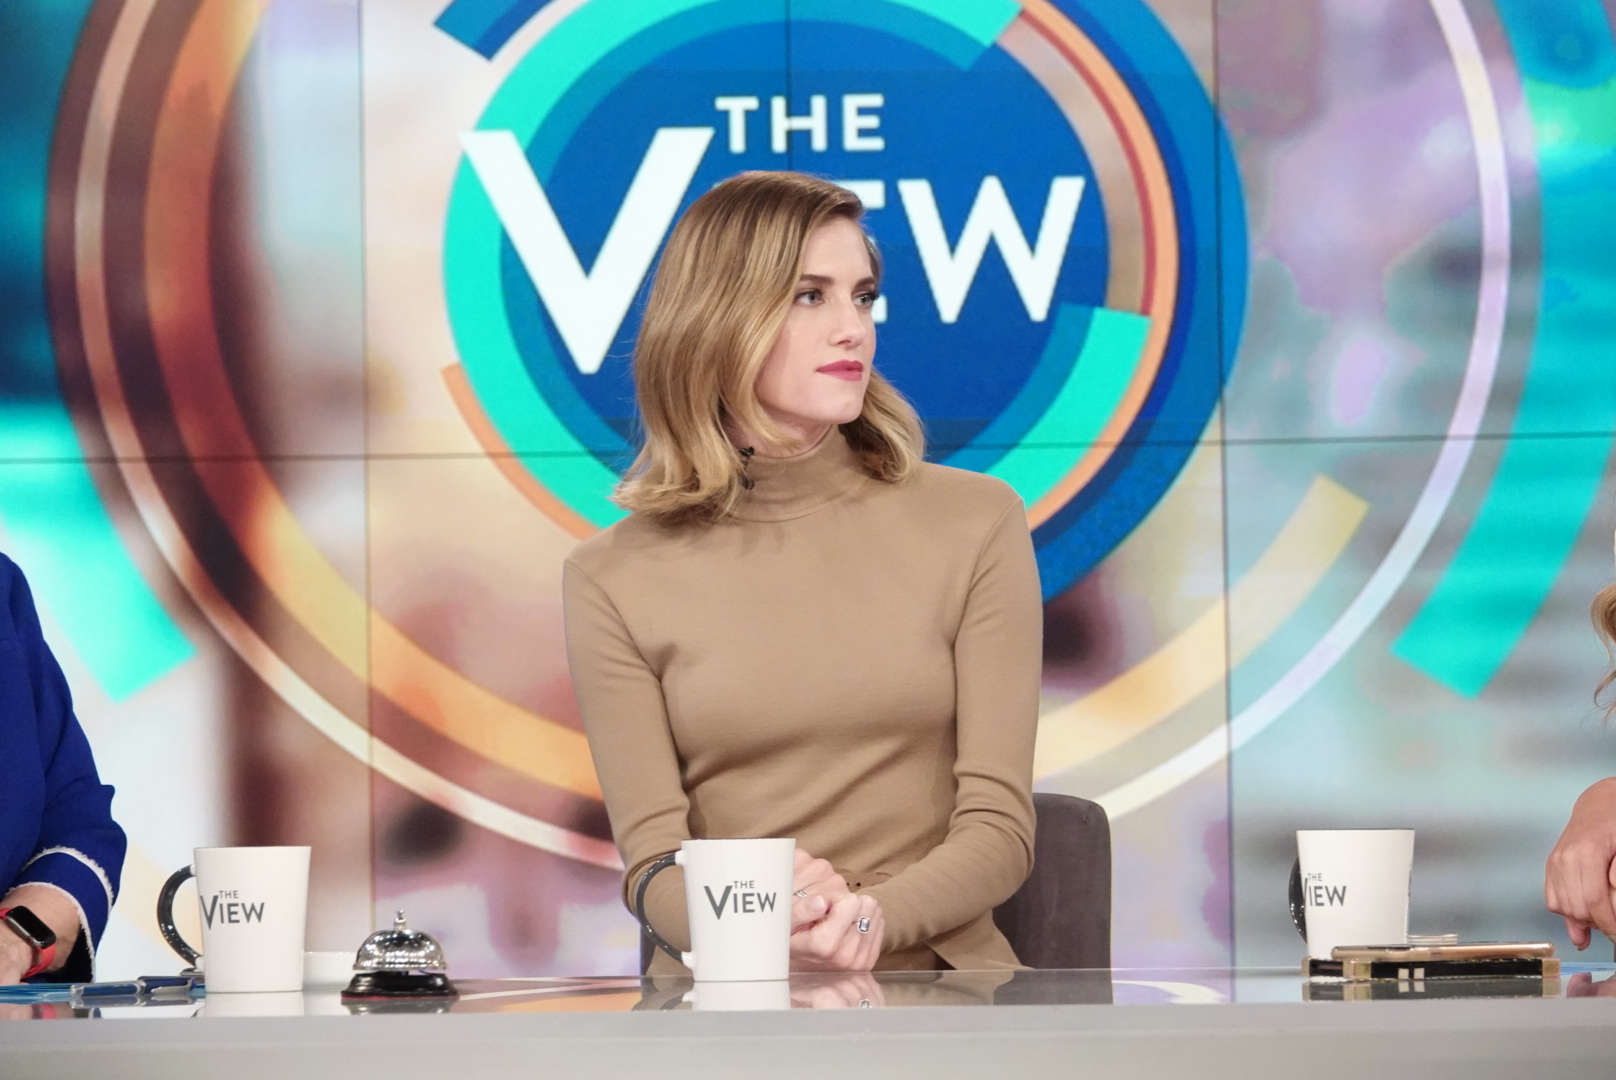 PHOTO: Allison Williams spoke with "The View" about her new role in the Netflix thriller "The Perfection."